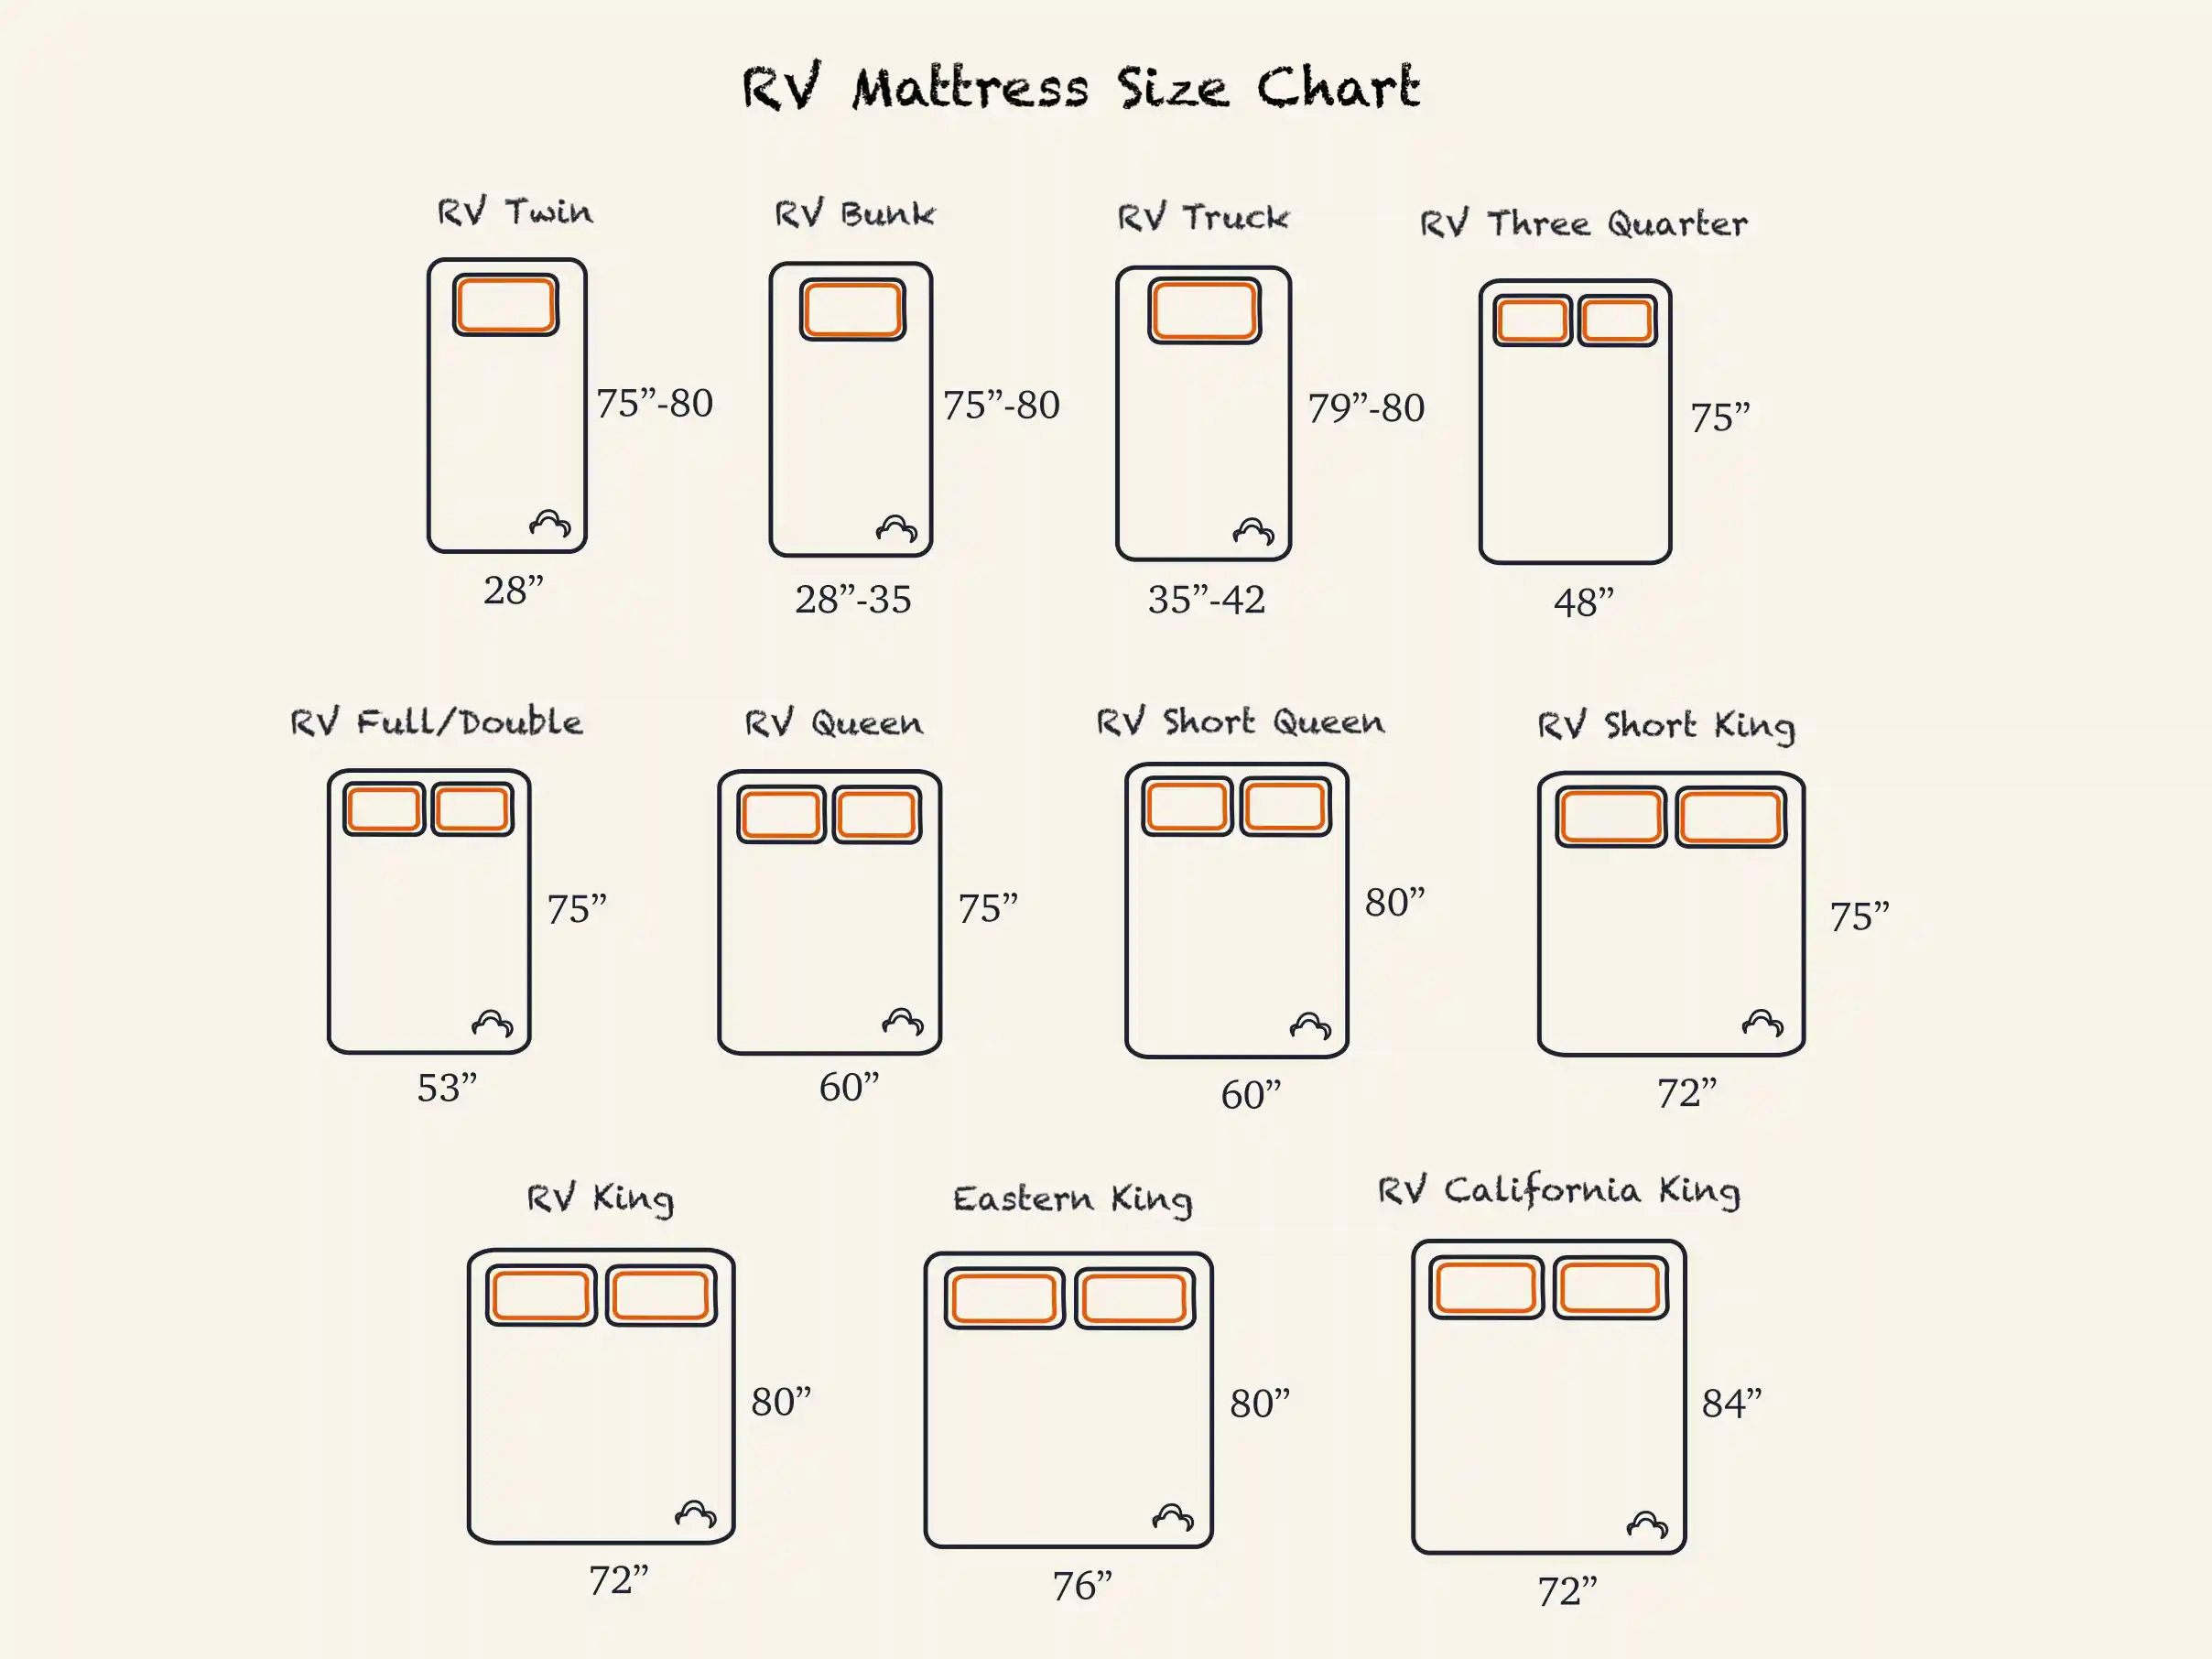 RV Mattress Sizes And Dimensions With Cutout Guide!! | vlr.eng.br